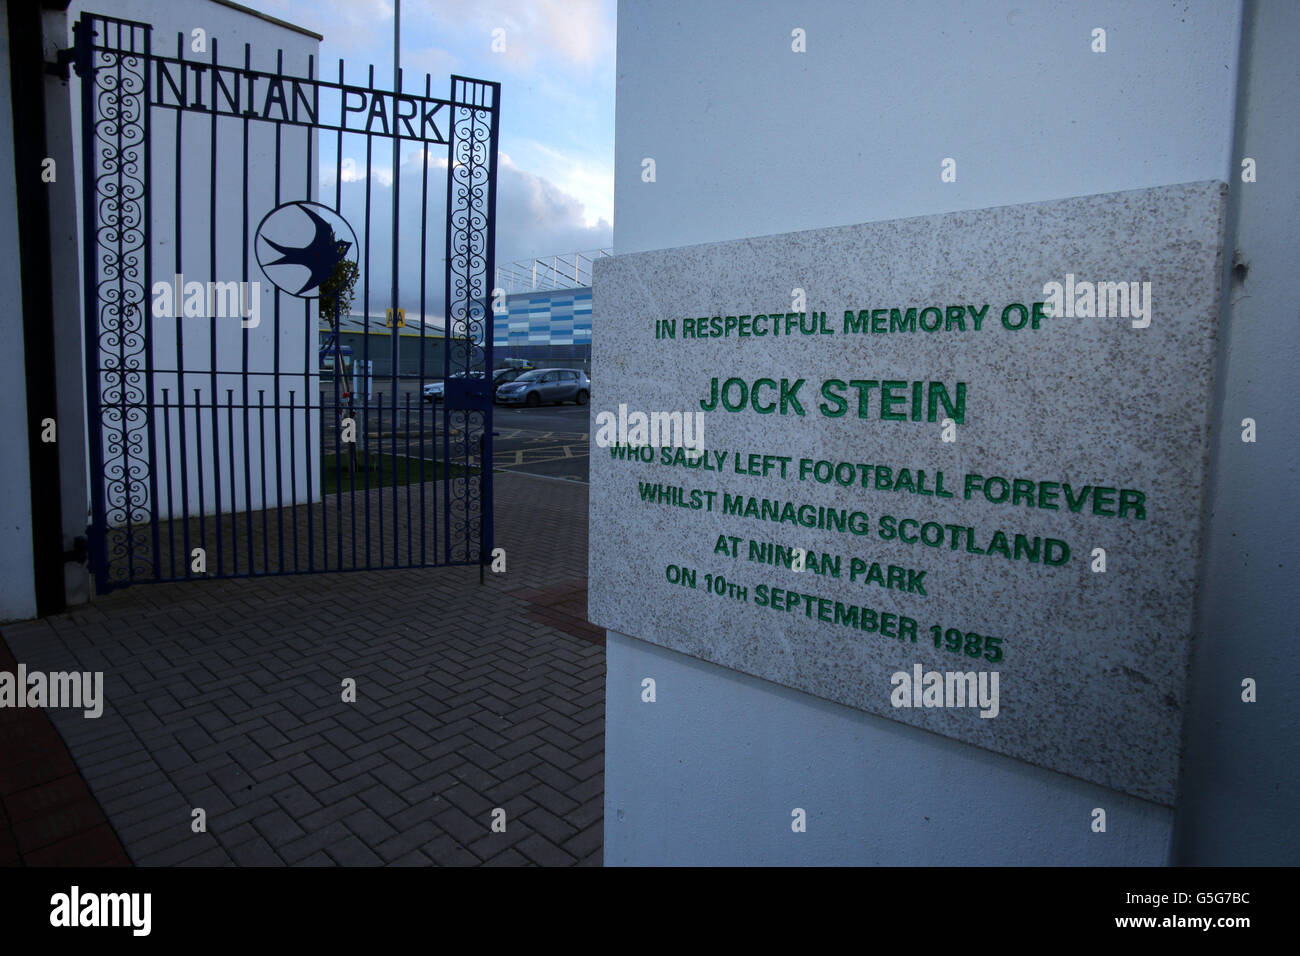 The old Ninian Park Gates with the plaque in memory of former Scotland Manager Jock Stein prior to the 2014 FIFA World Cup Qualifying match at Cardiff City Stadium, Cardiff. Stock Photo